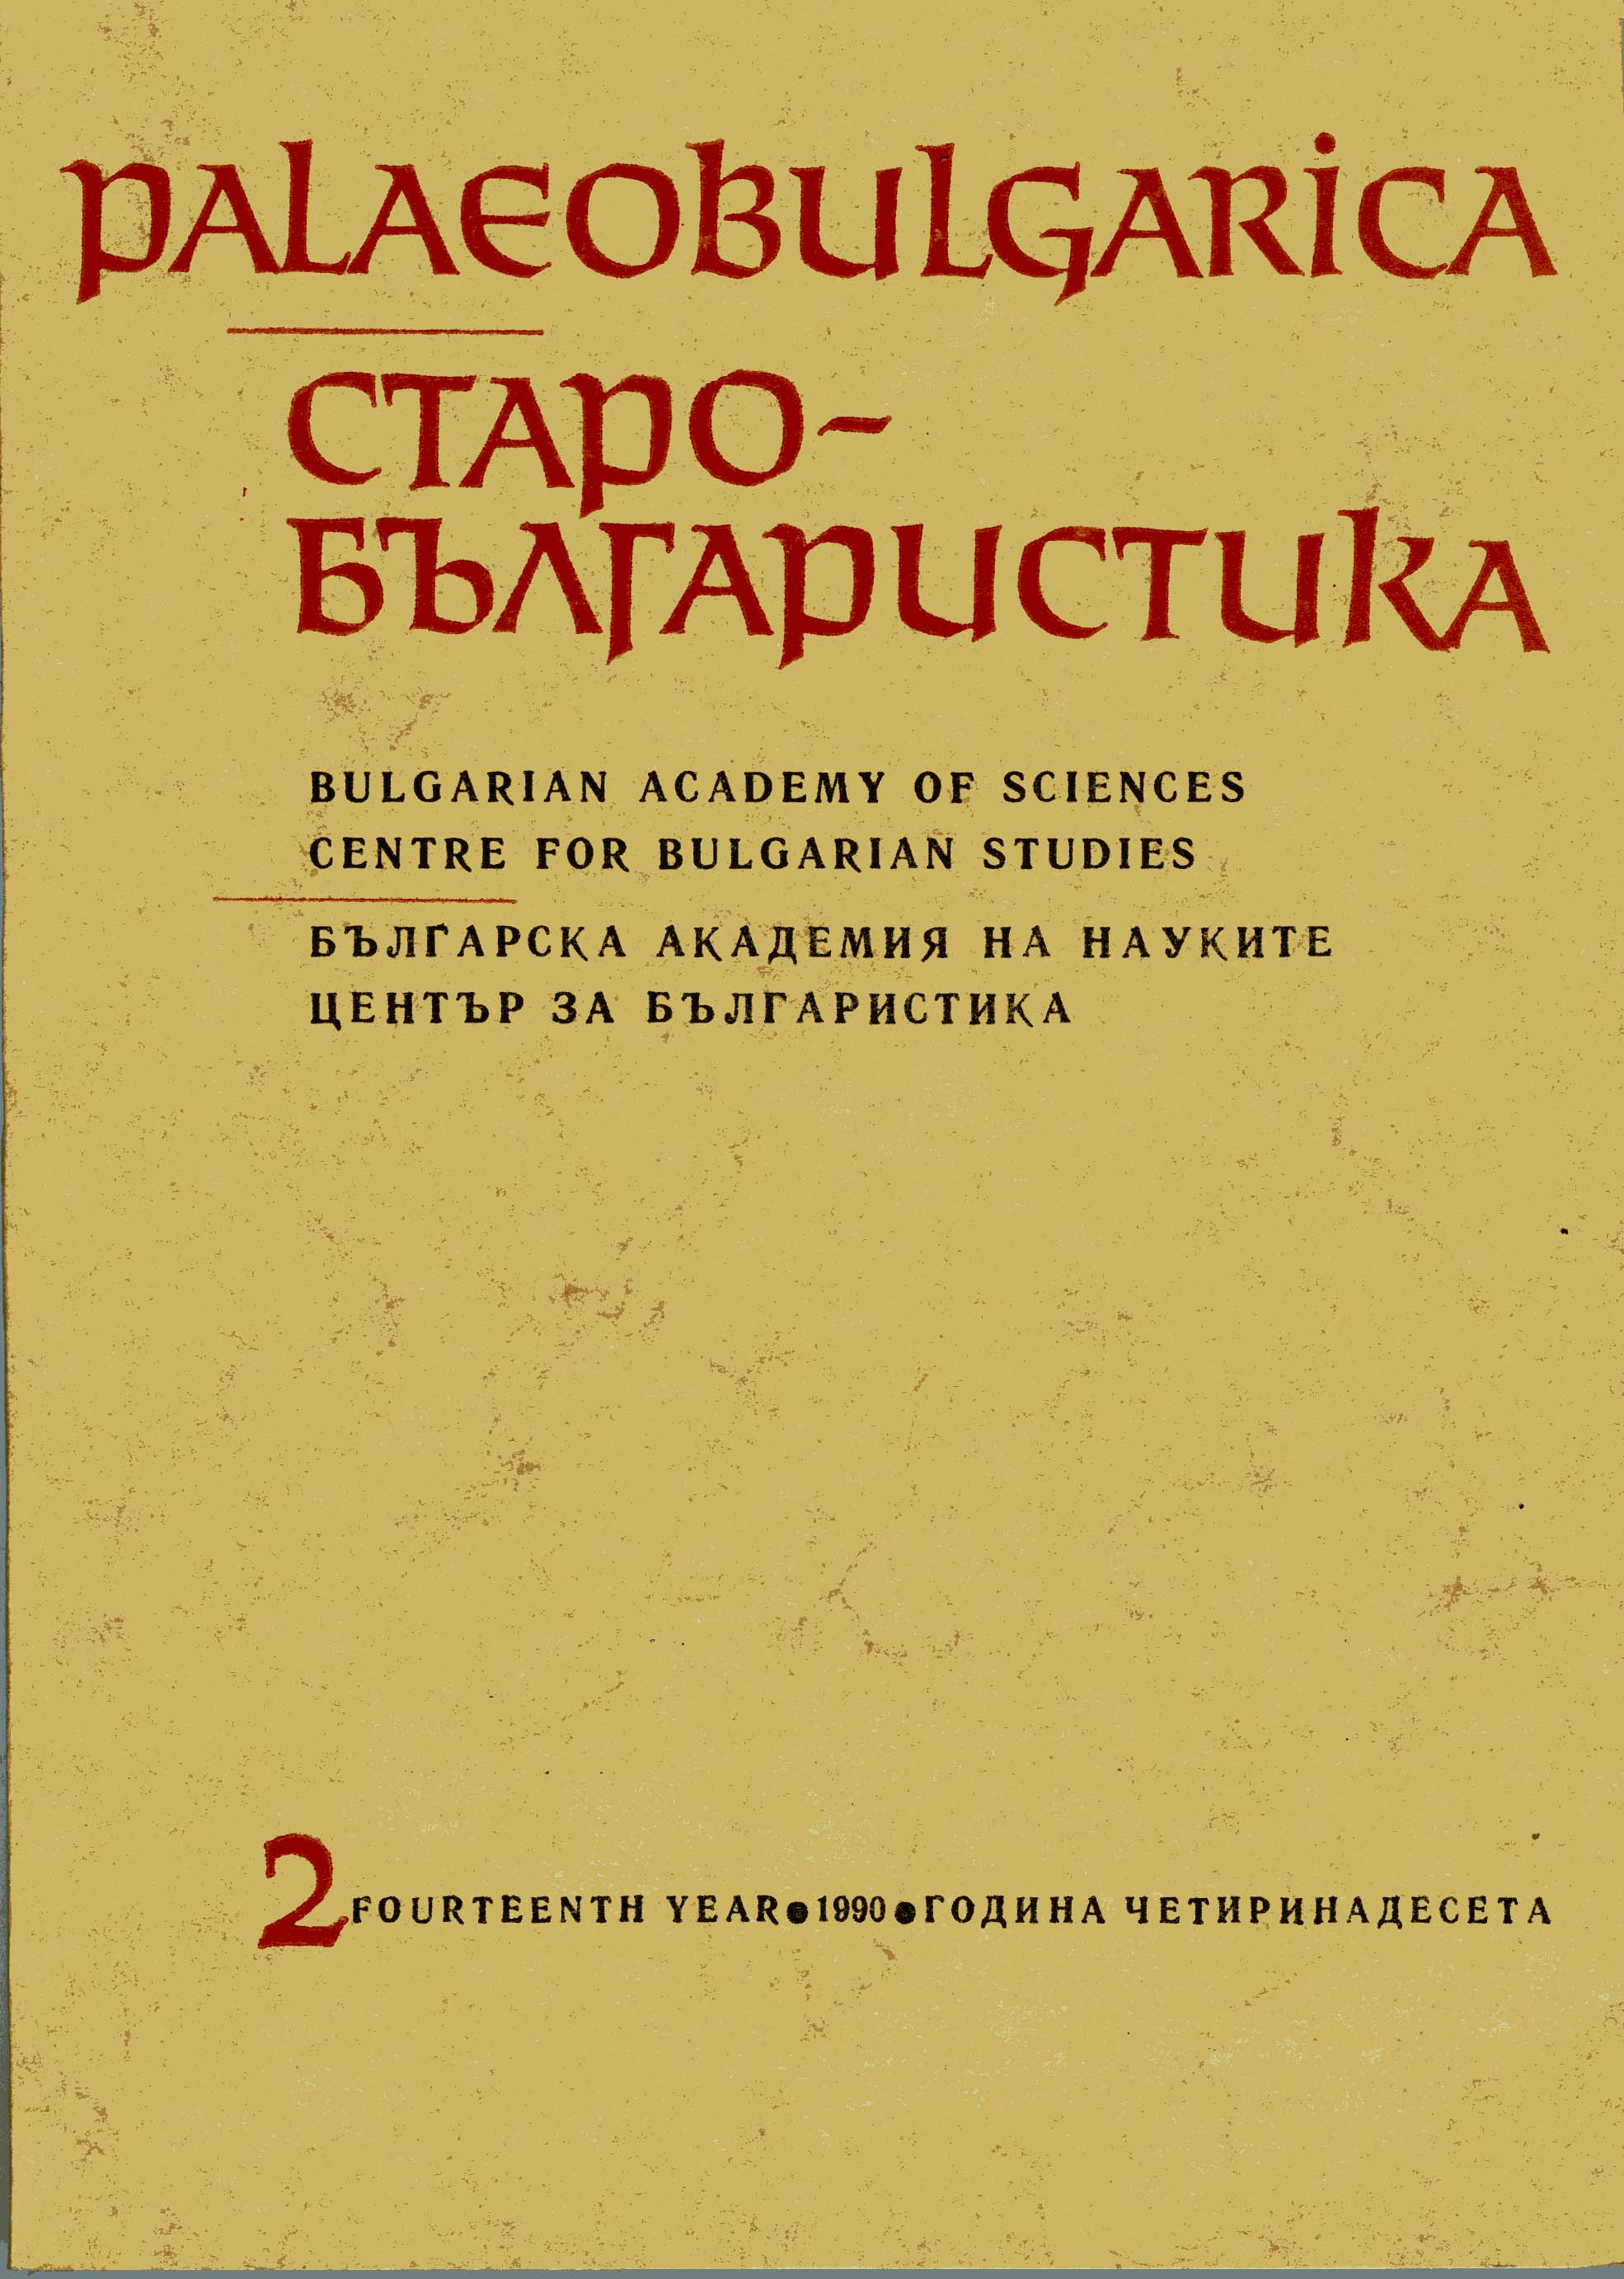 An Attempt at Evolving a New View of the History of Literary Bulgarian Cover Image